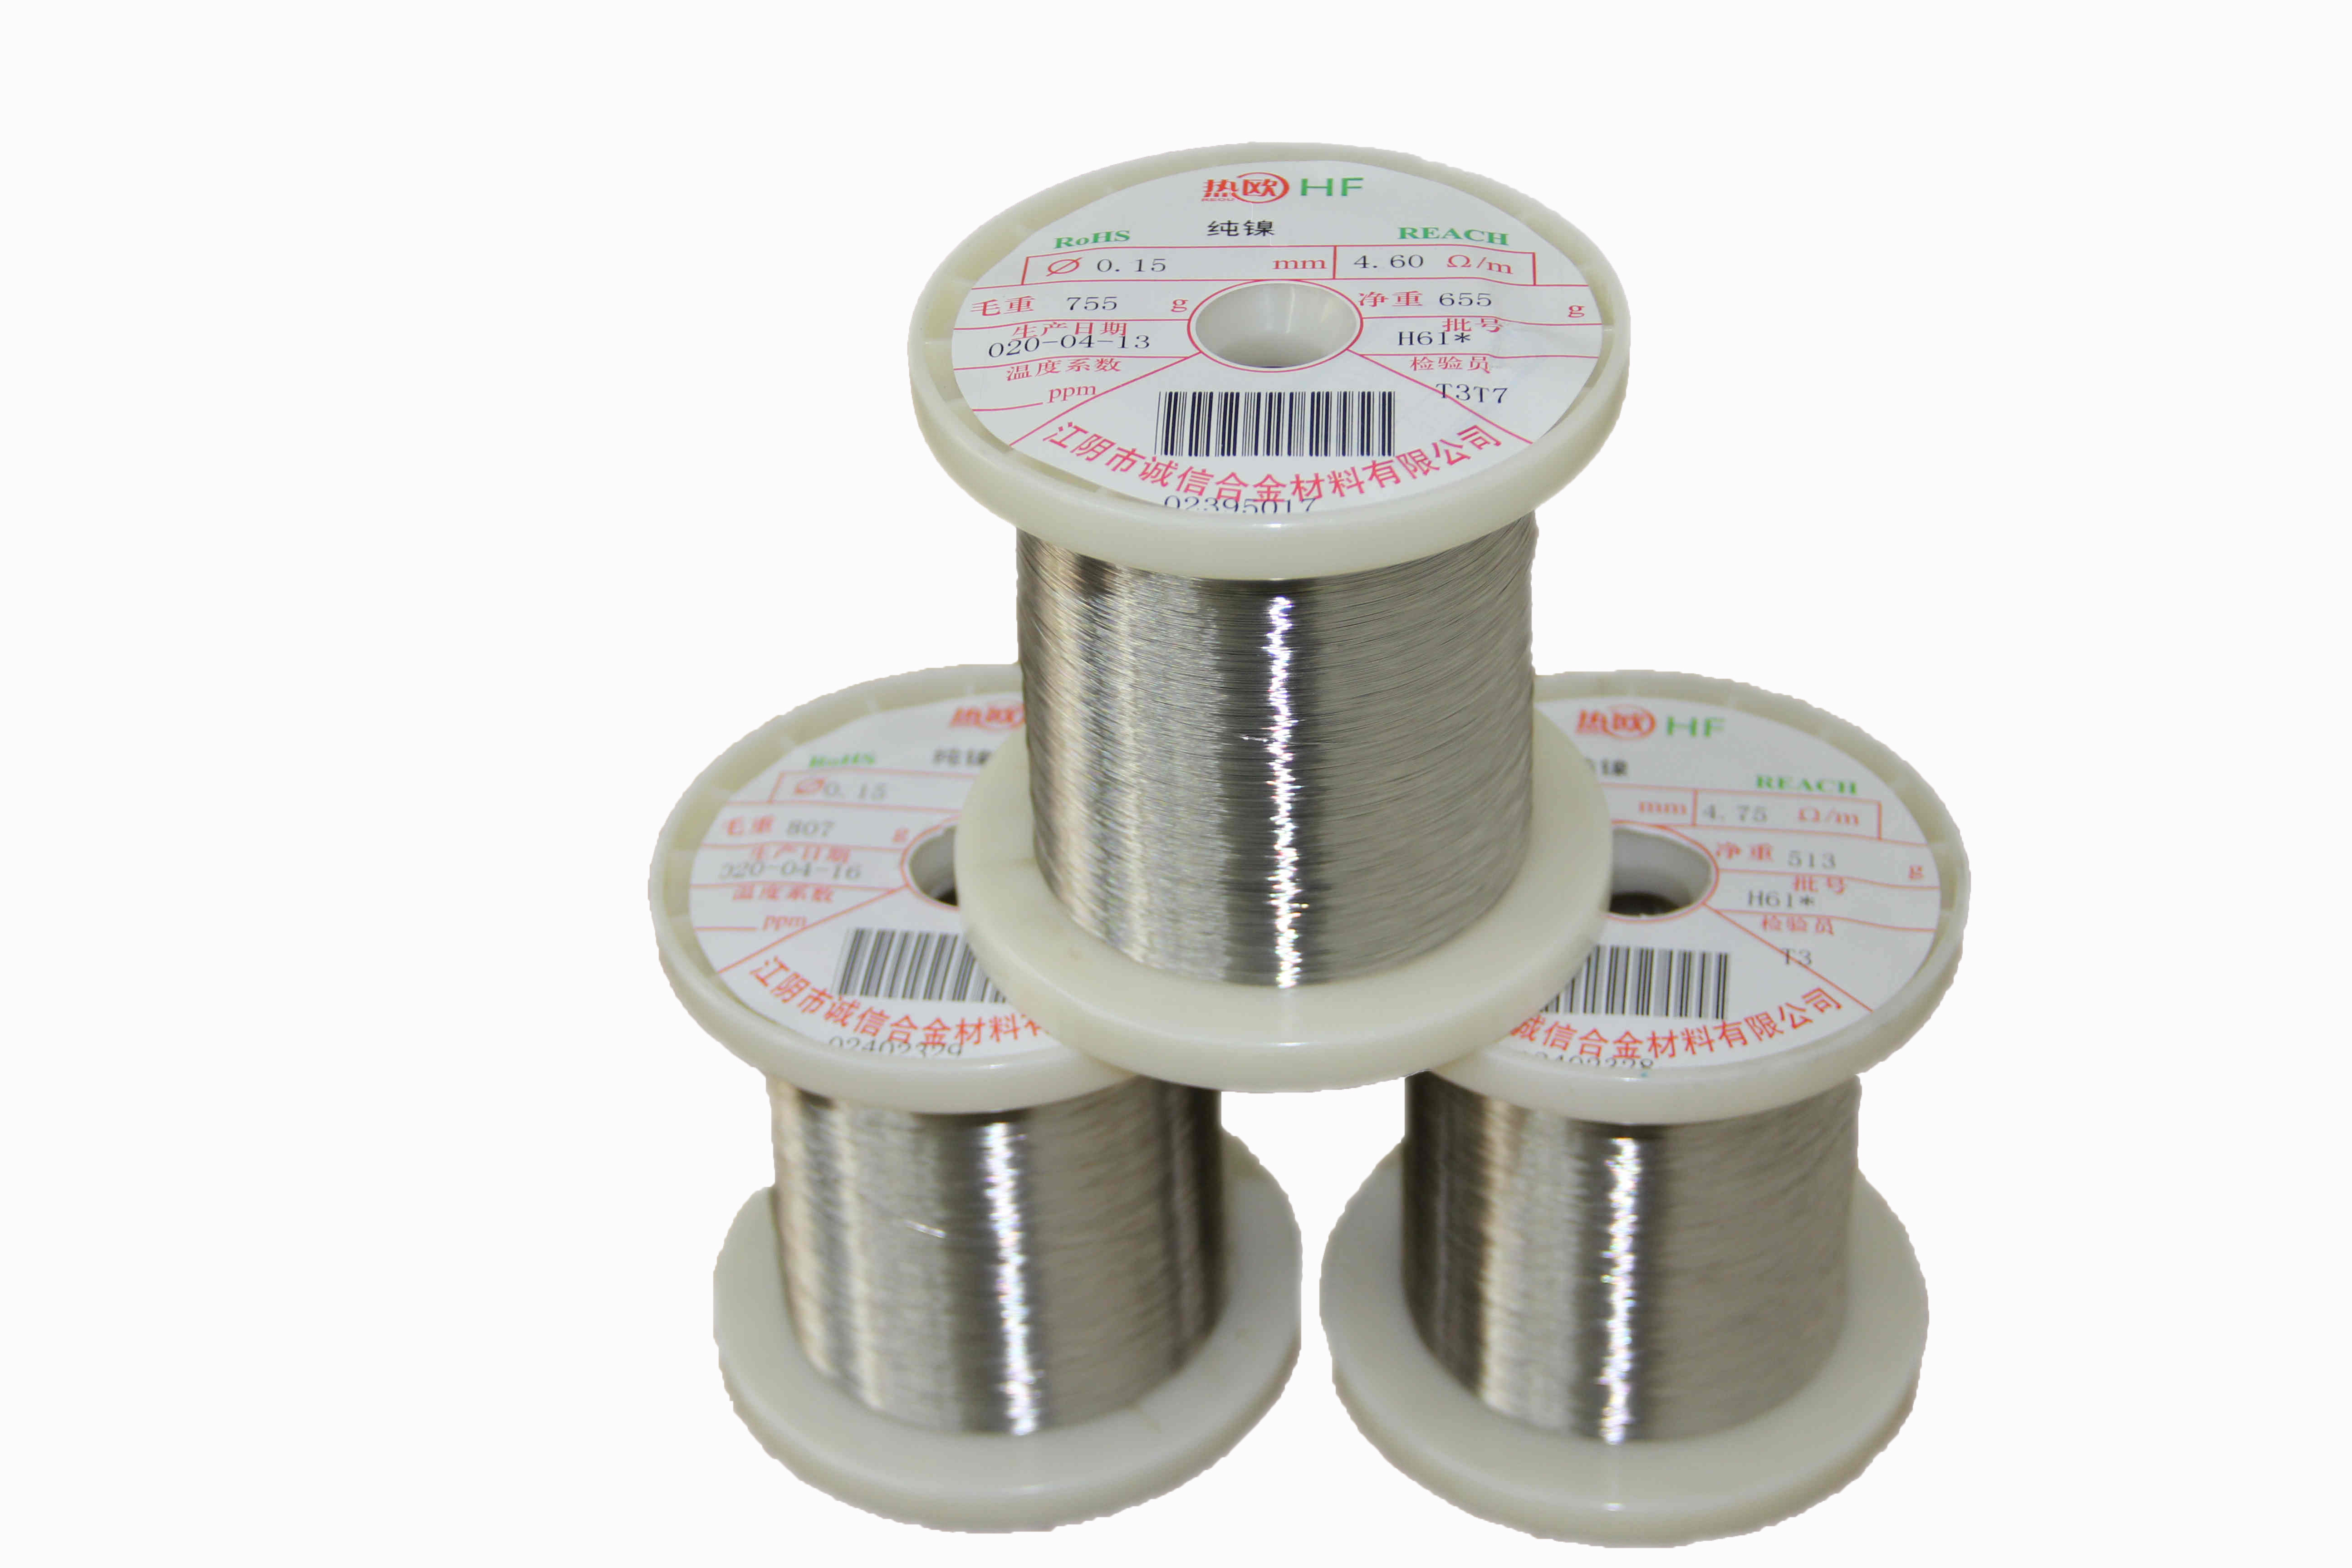 Pure Nickel wires